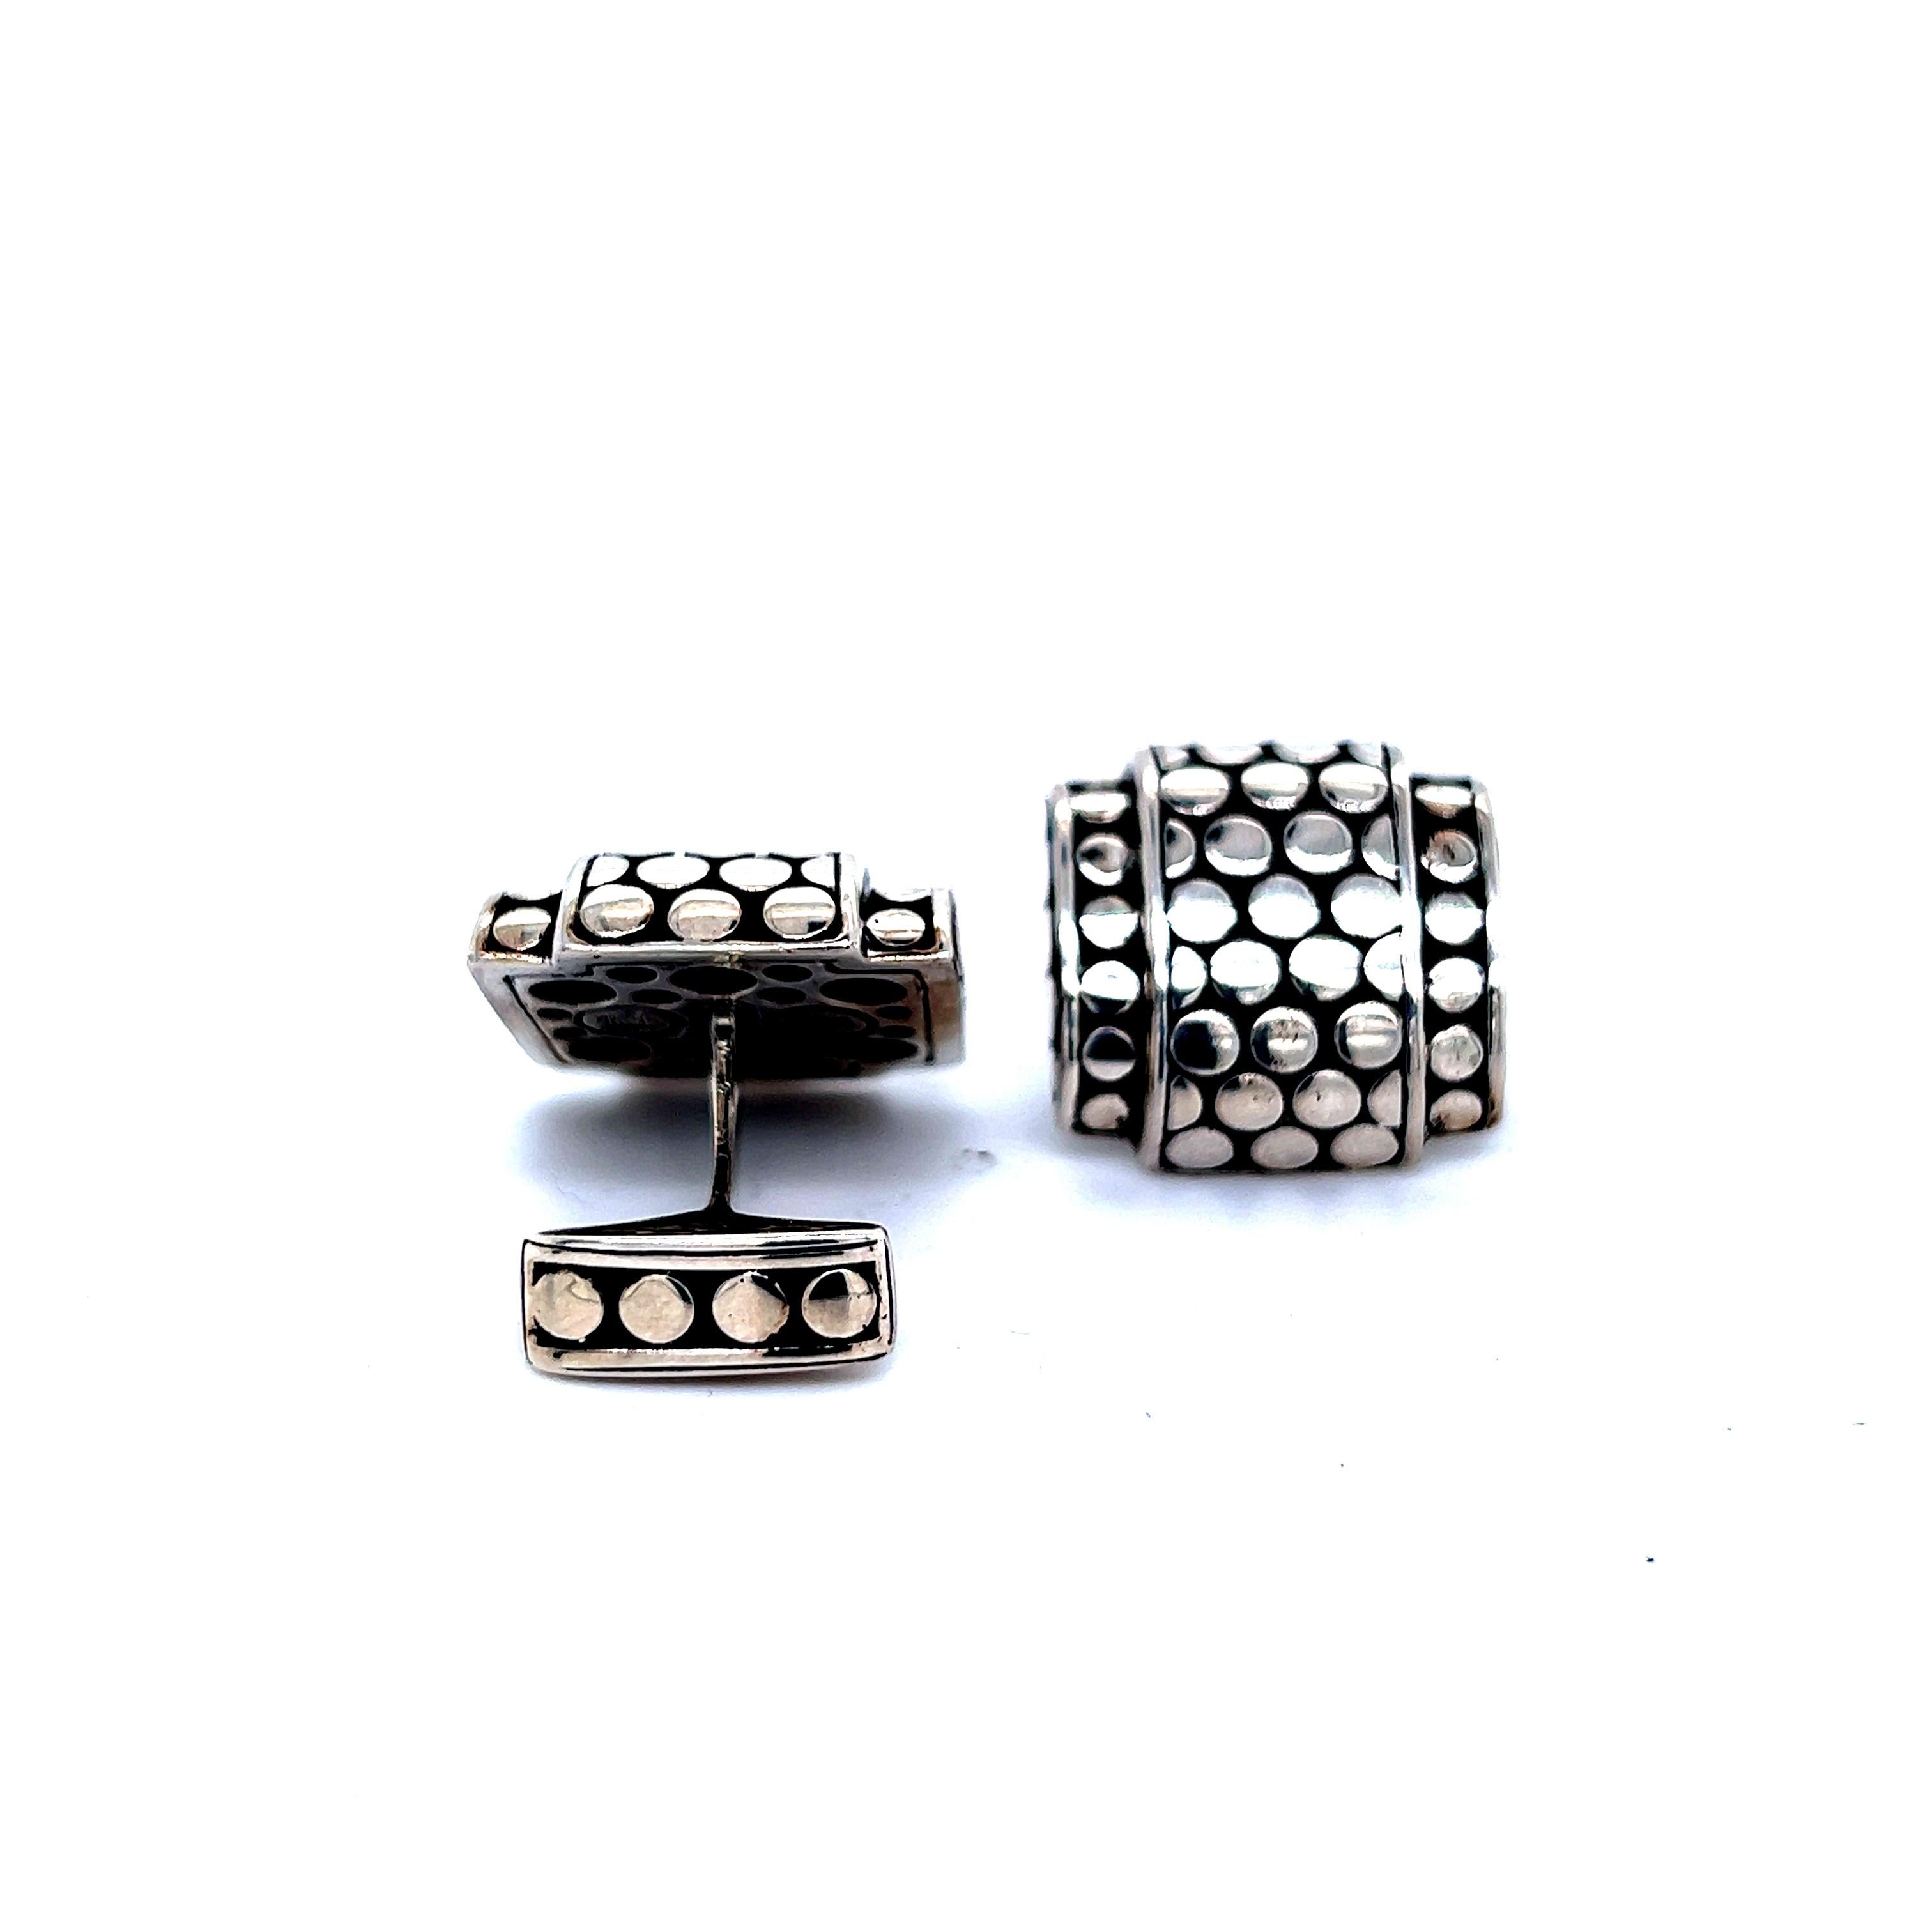 John Hardy Estate Mens Dot Cufflinks Sterling Silver JH18

TRUSTED SELLER SINCE 2002

PLEASE SEE OUR HUNDREDS OF POSITIVE FEEDBACKS FROM OUR CLIENTS!!

FREE SHIPPING!!

DETAILS
Weight: 20 Grams
Metal: Sterling Silver

The John Hardy jewelry items